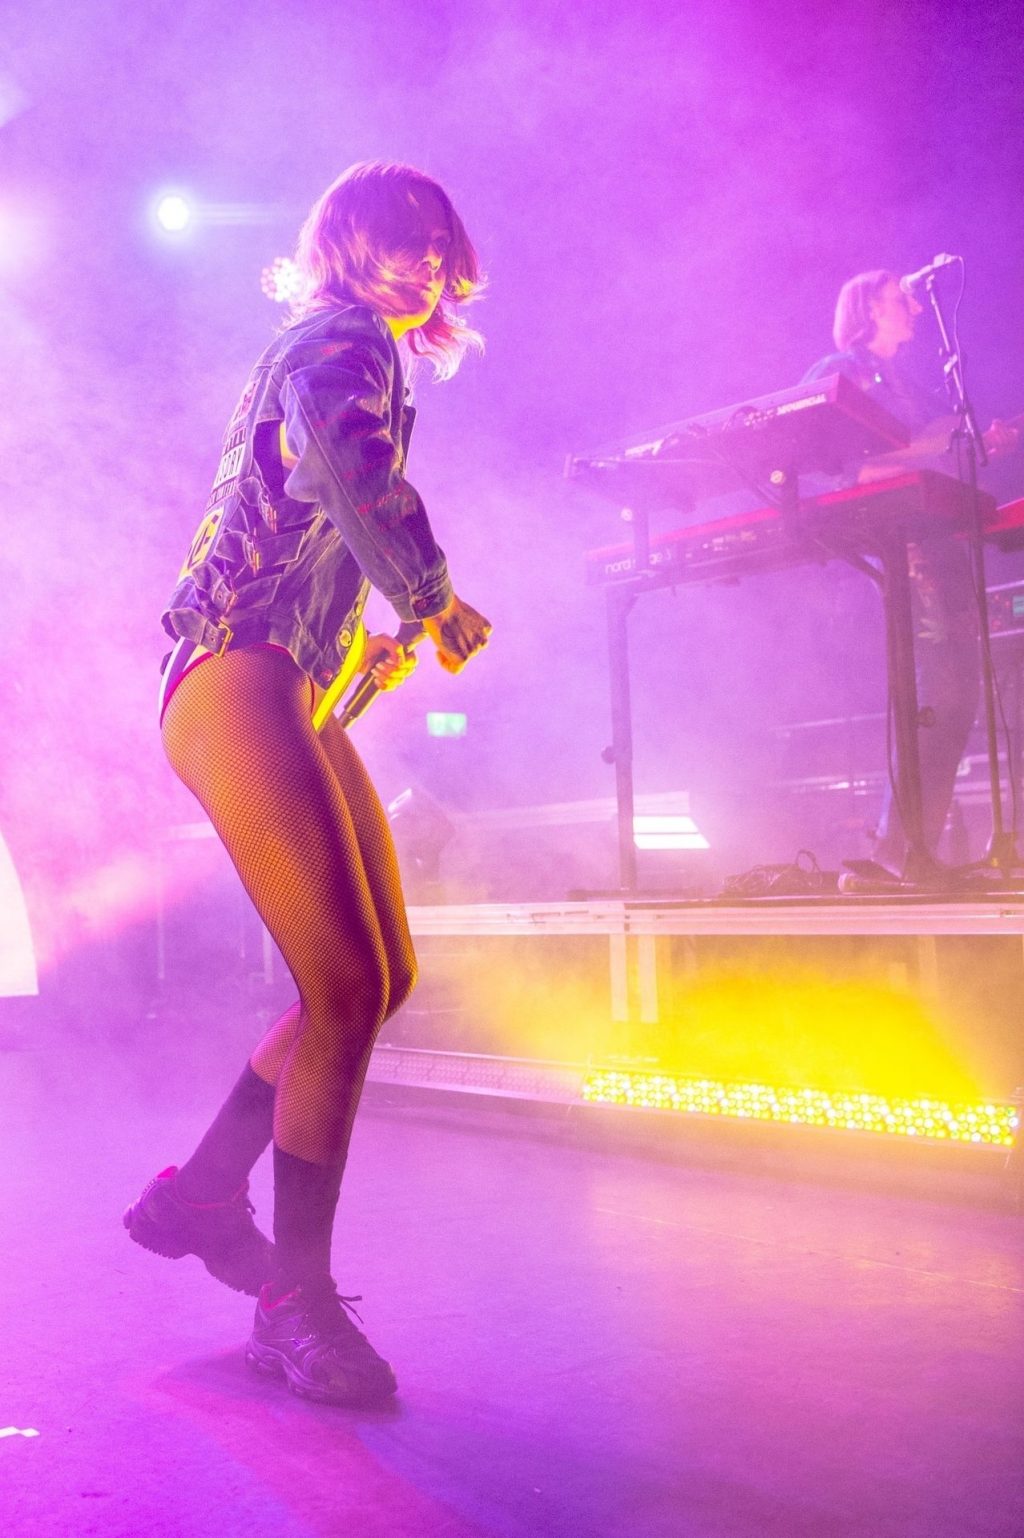 Tove Lo is in Concert Performing Live at O2 Forum Kentish Town in London (76 Photos)